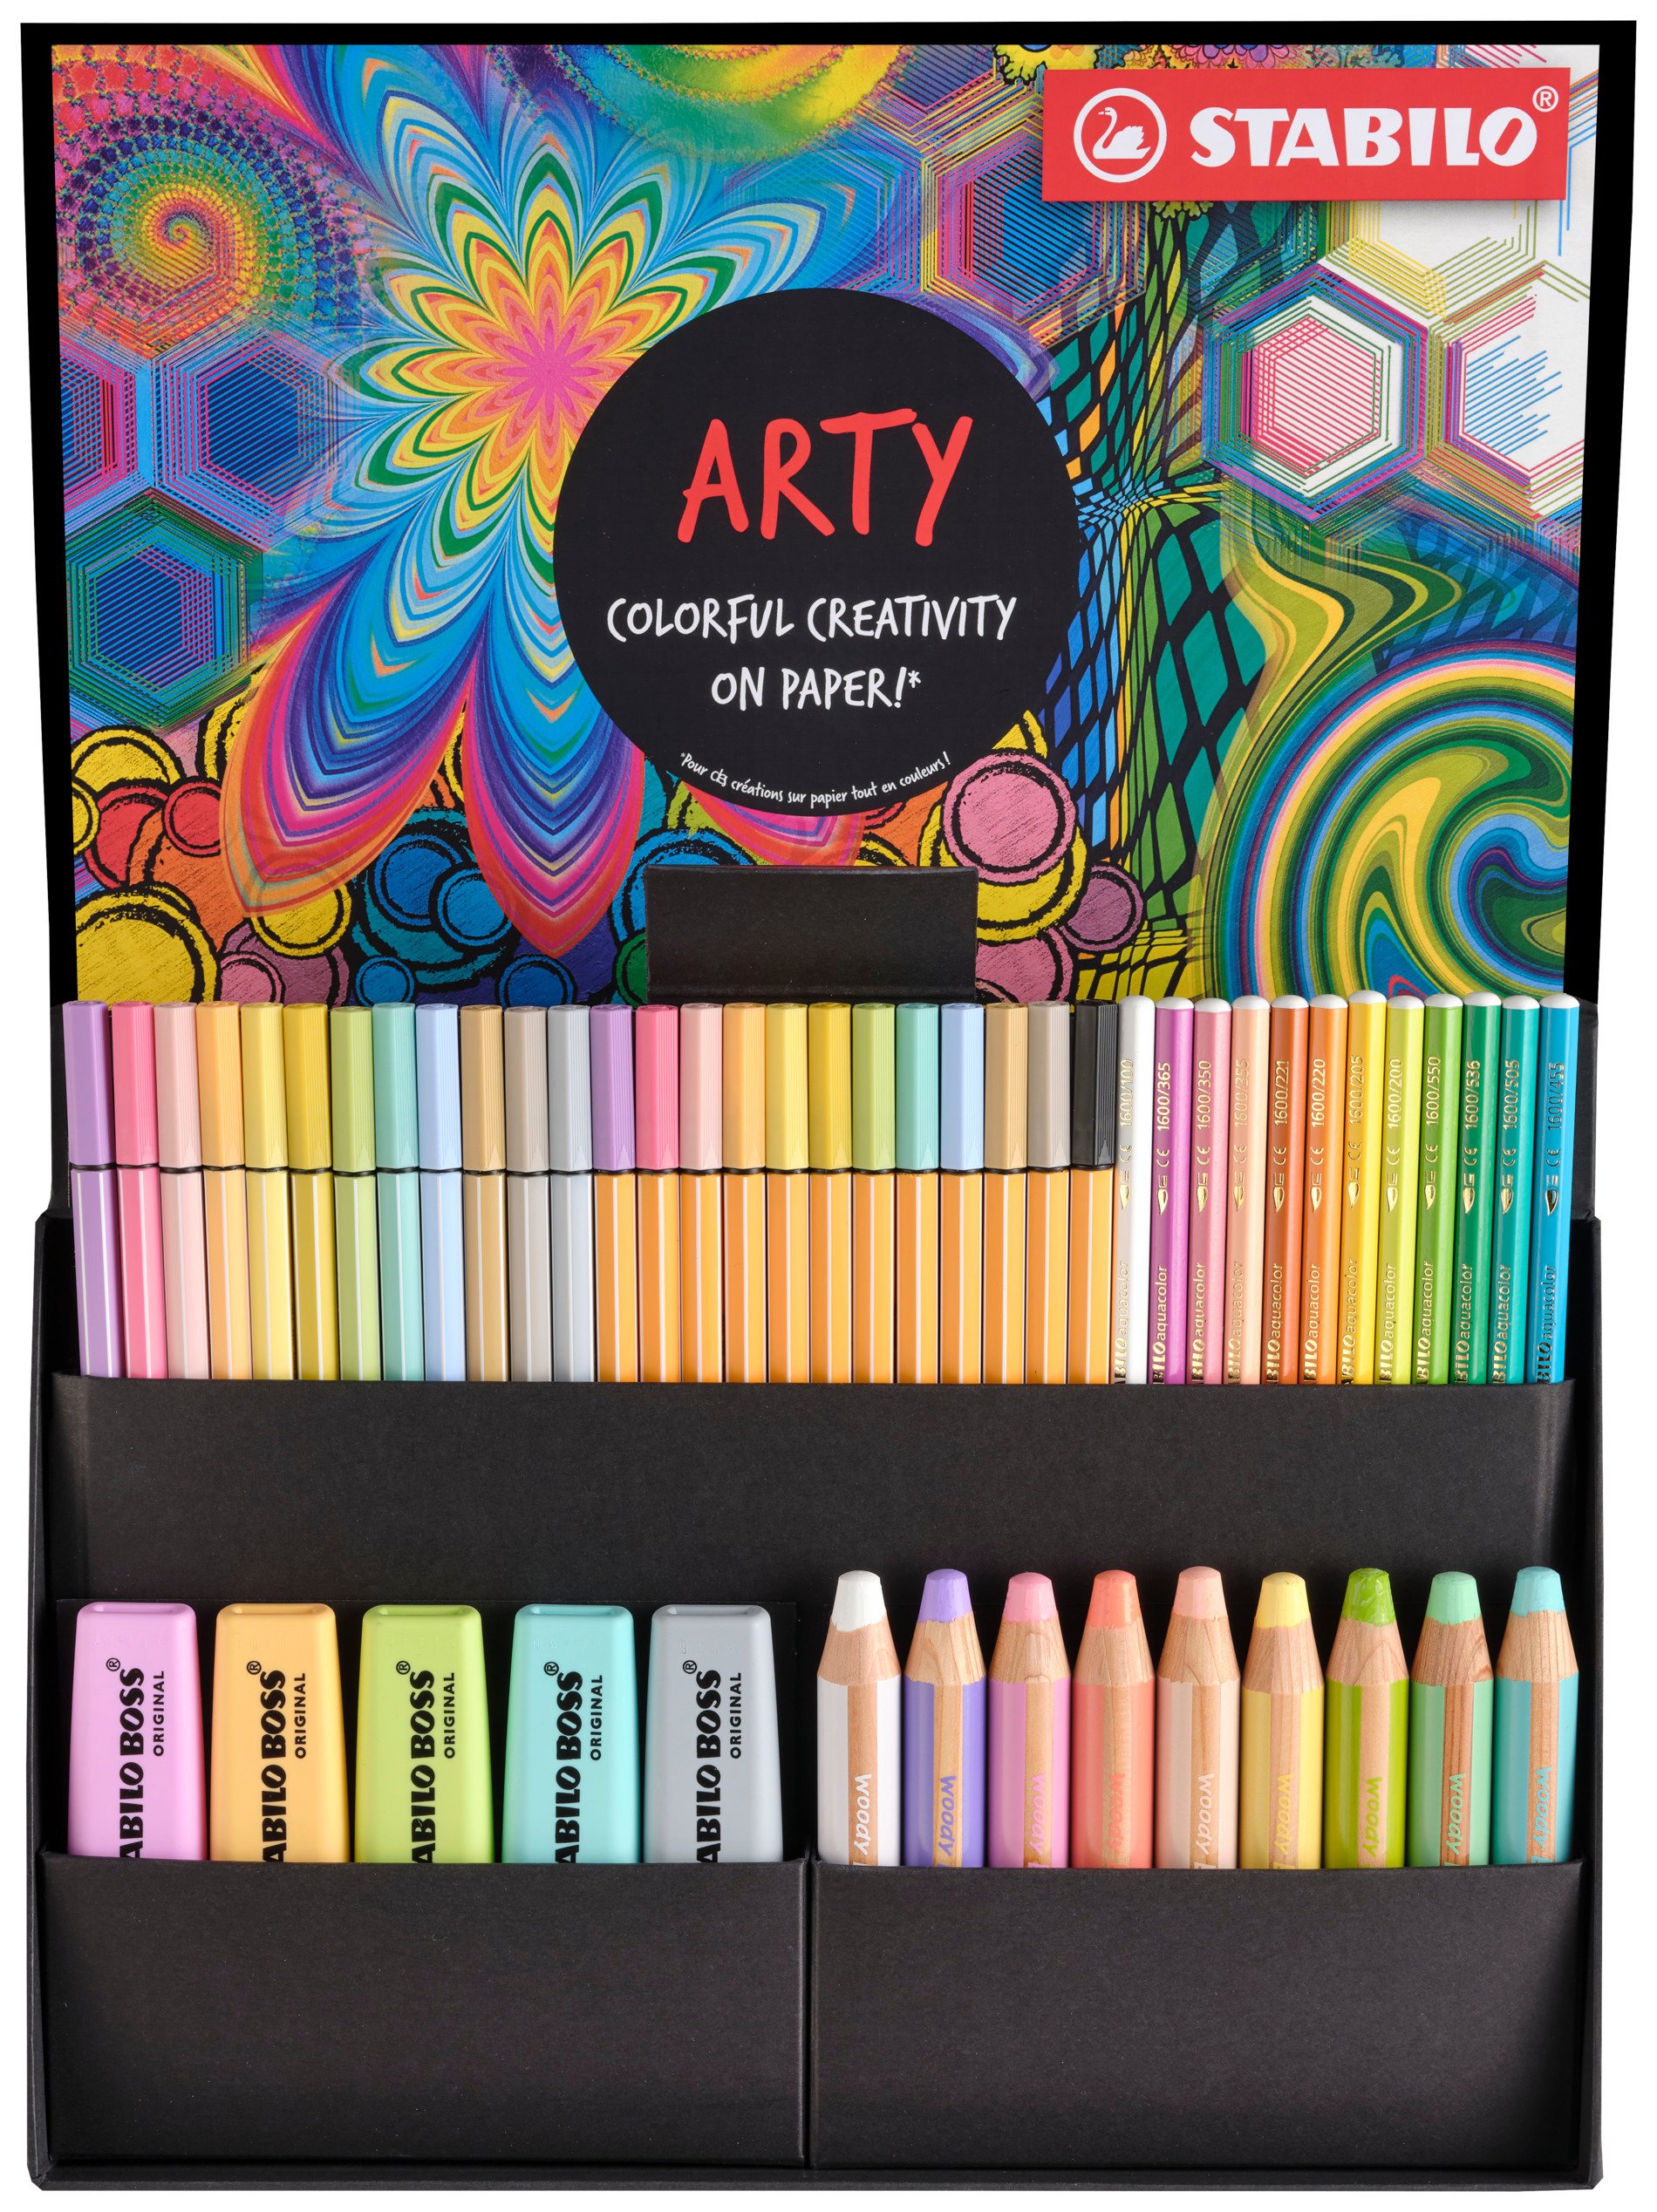 The STABILO ARTY Creative Set Pastel with 50 high quality pens